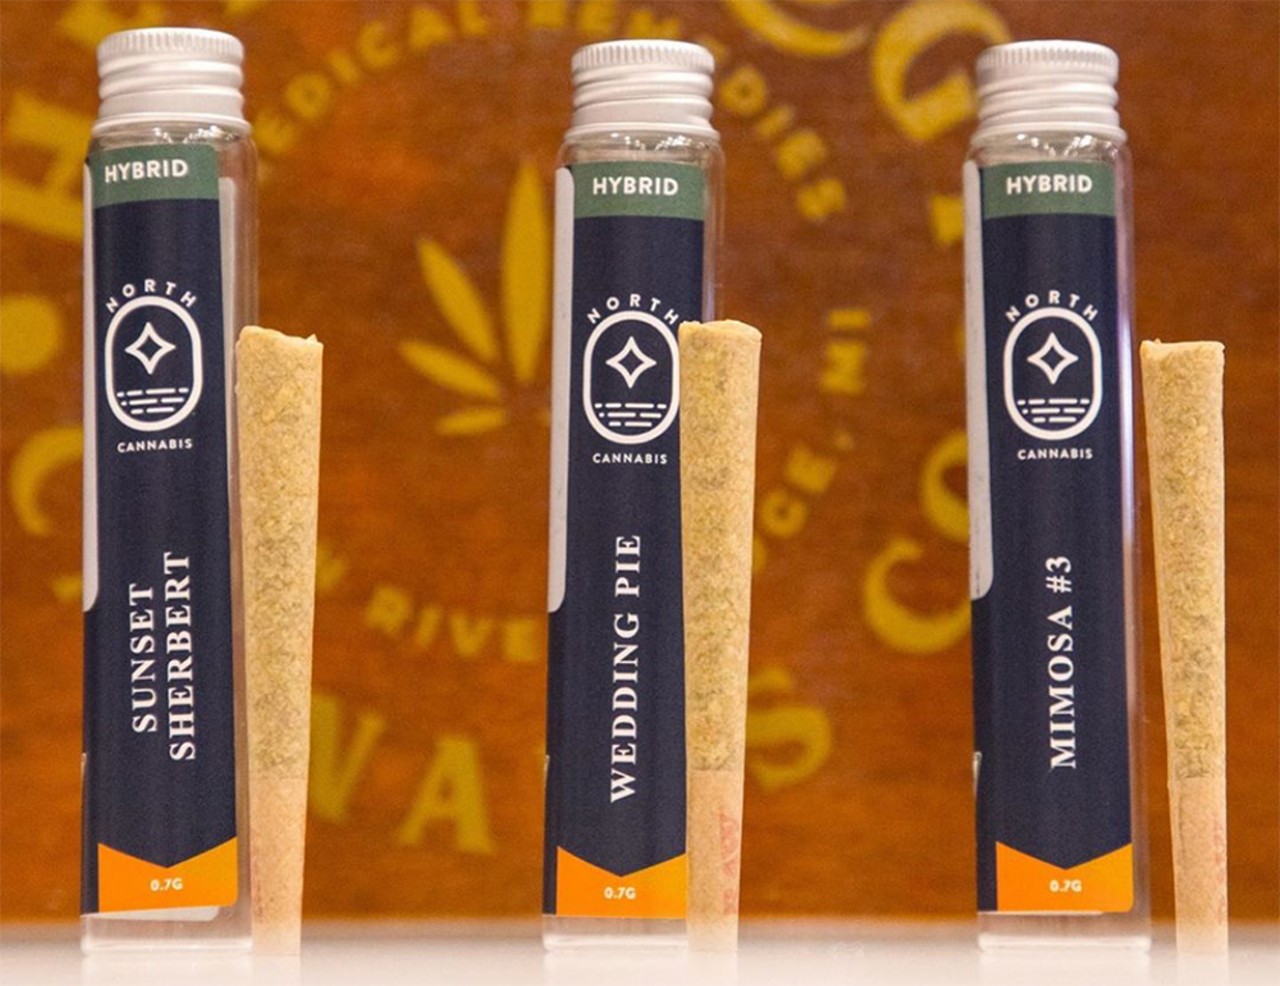 North Cannabis pre-rolls
Available from: Herbology; 11392 W. Jefferson Ave., River Rouge; 313-757-7684 | Herbal Healing Provisioning; 61 Burke St., River Rouge; 313-451-8007
Pre-rolls are great for people who do not feel like rolling their own flower, just take out the package and light! These go for $12 each and are great stocking stuffers! Available at both Herbology Cannabis Co. and Herbal Healing Provisioning.
Photo courtesy of North Cannabis